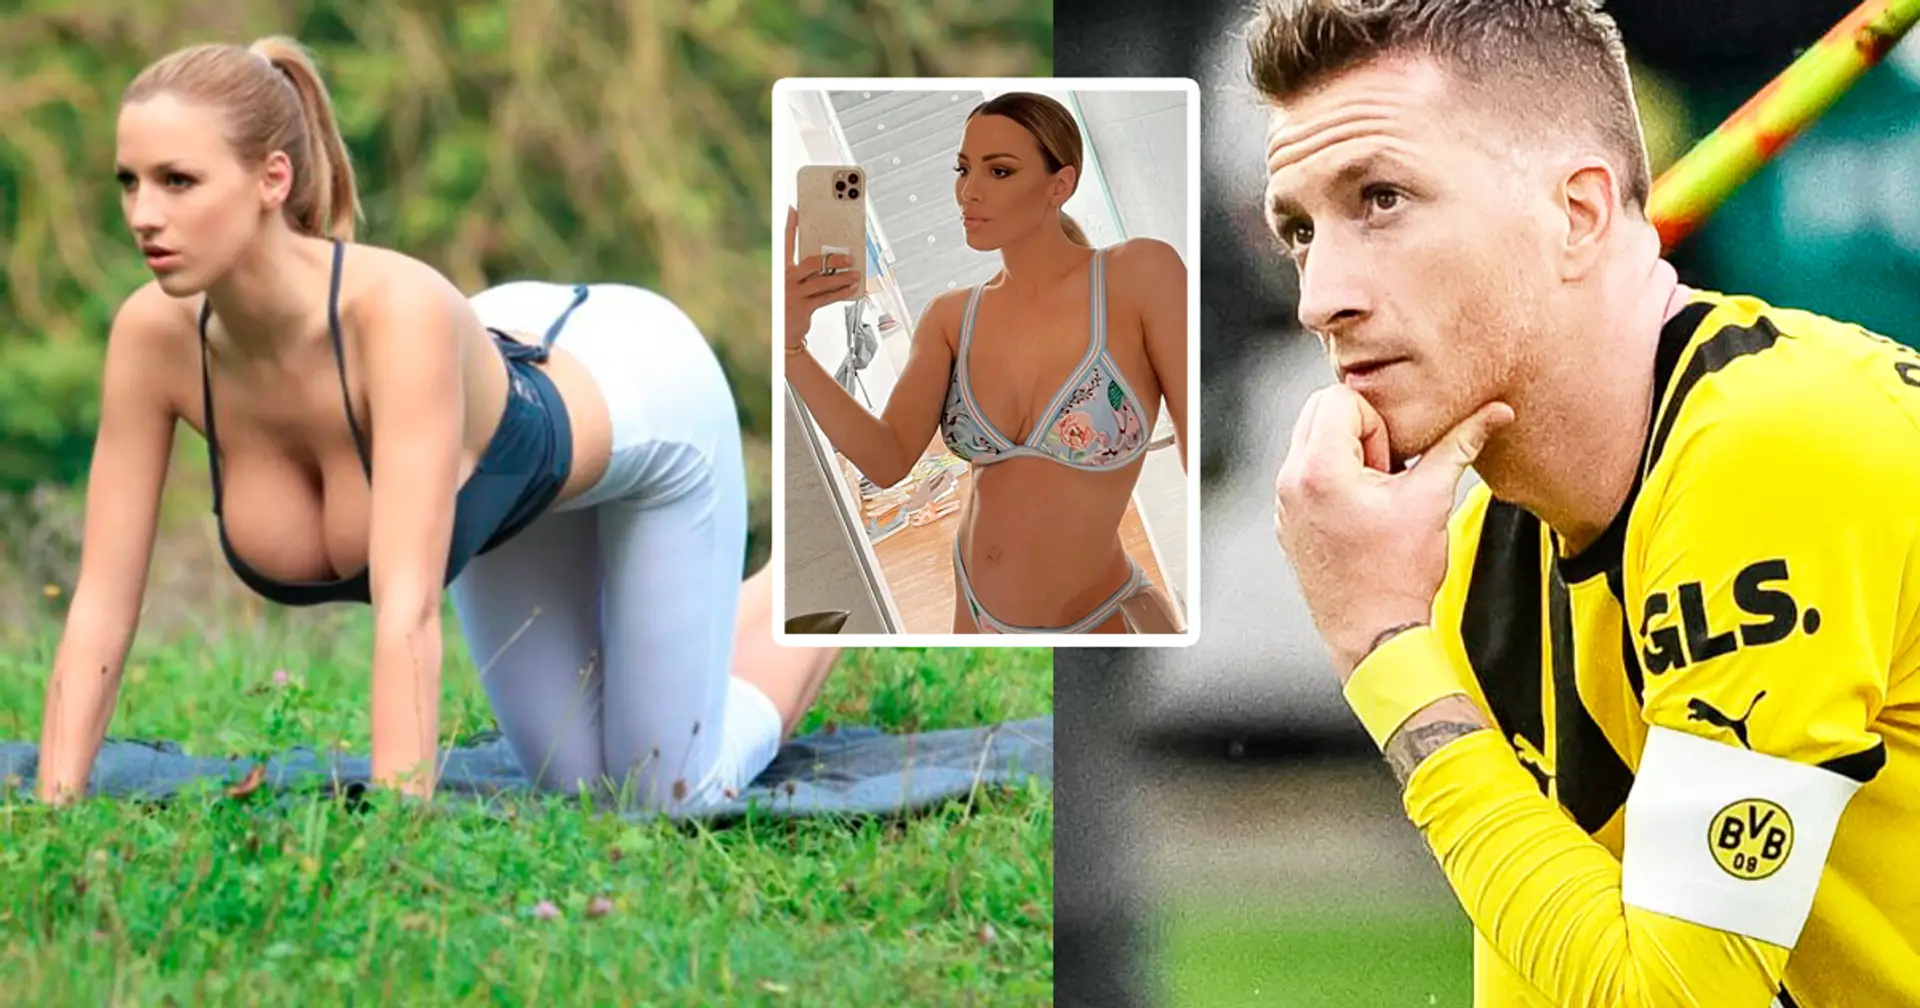 Bayern Munich's 'hottest fan' offered to chauffer Marco Reus if he joined from Dortmund